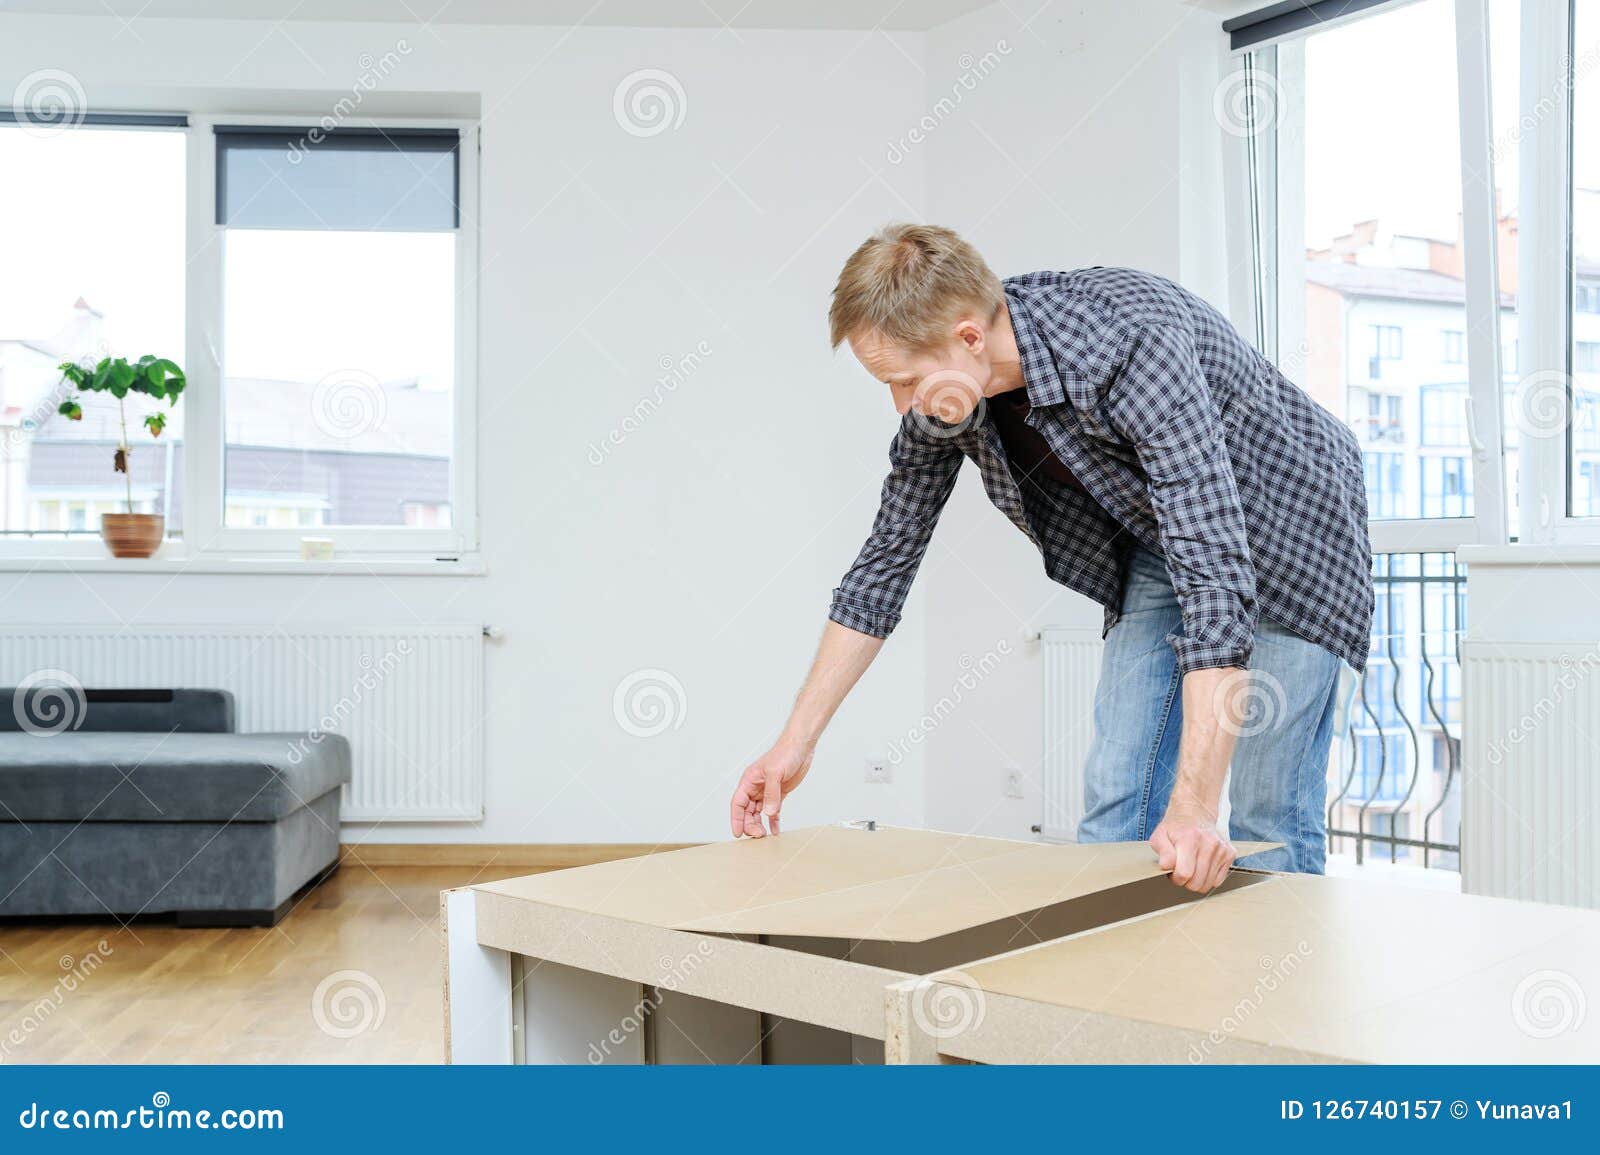 Furniture Assembly At Home Stock Image Image Of Cabinet